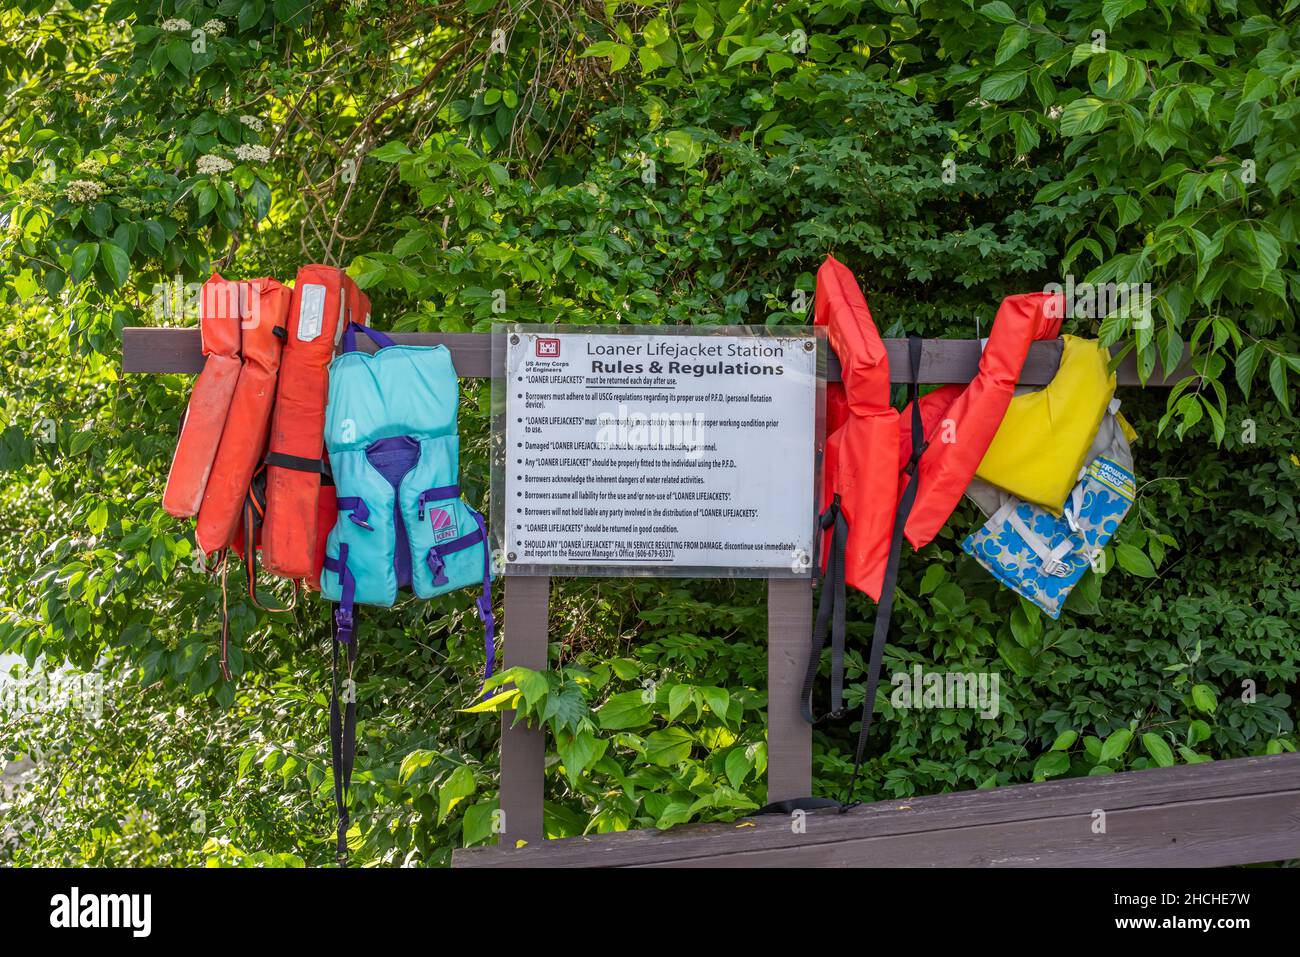 Loaner Lifejacket Station at US Army Corps of Engineers campground Stock Photo